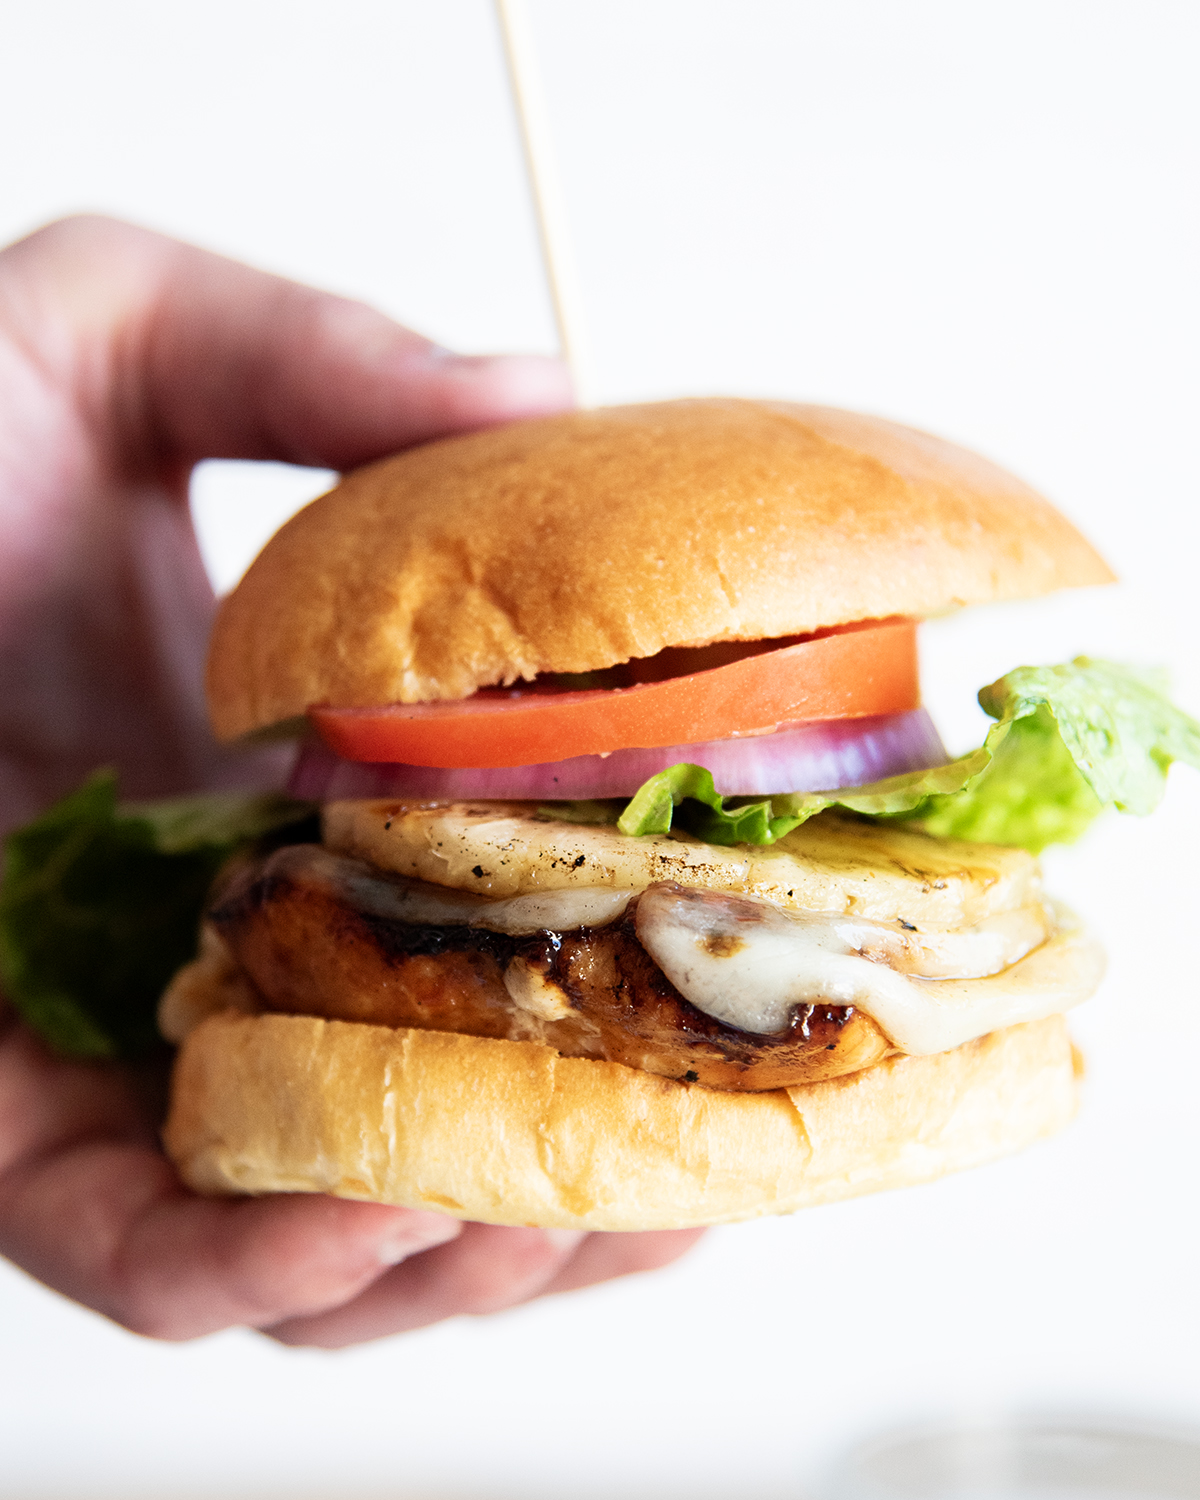 A hand holding a Hawaiian chicken sandwich, which has a chicken breast topped with cheese, tomato, and lettuce.